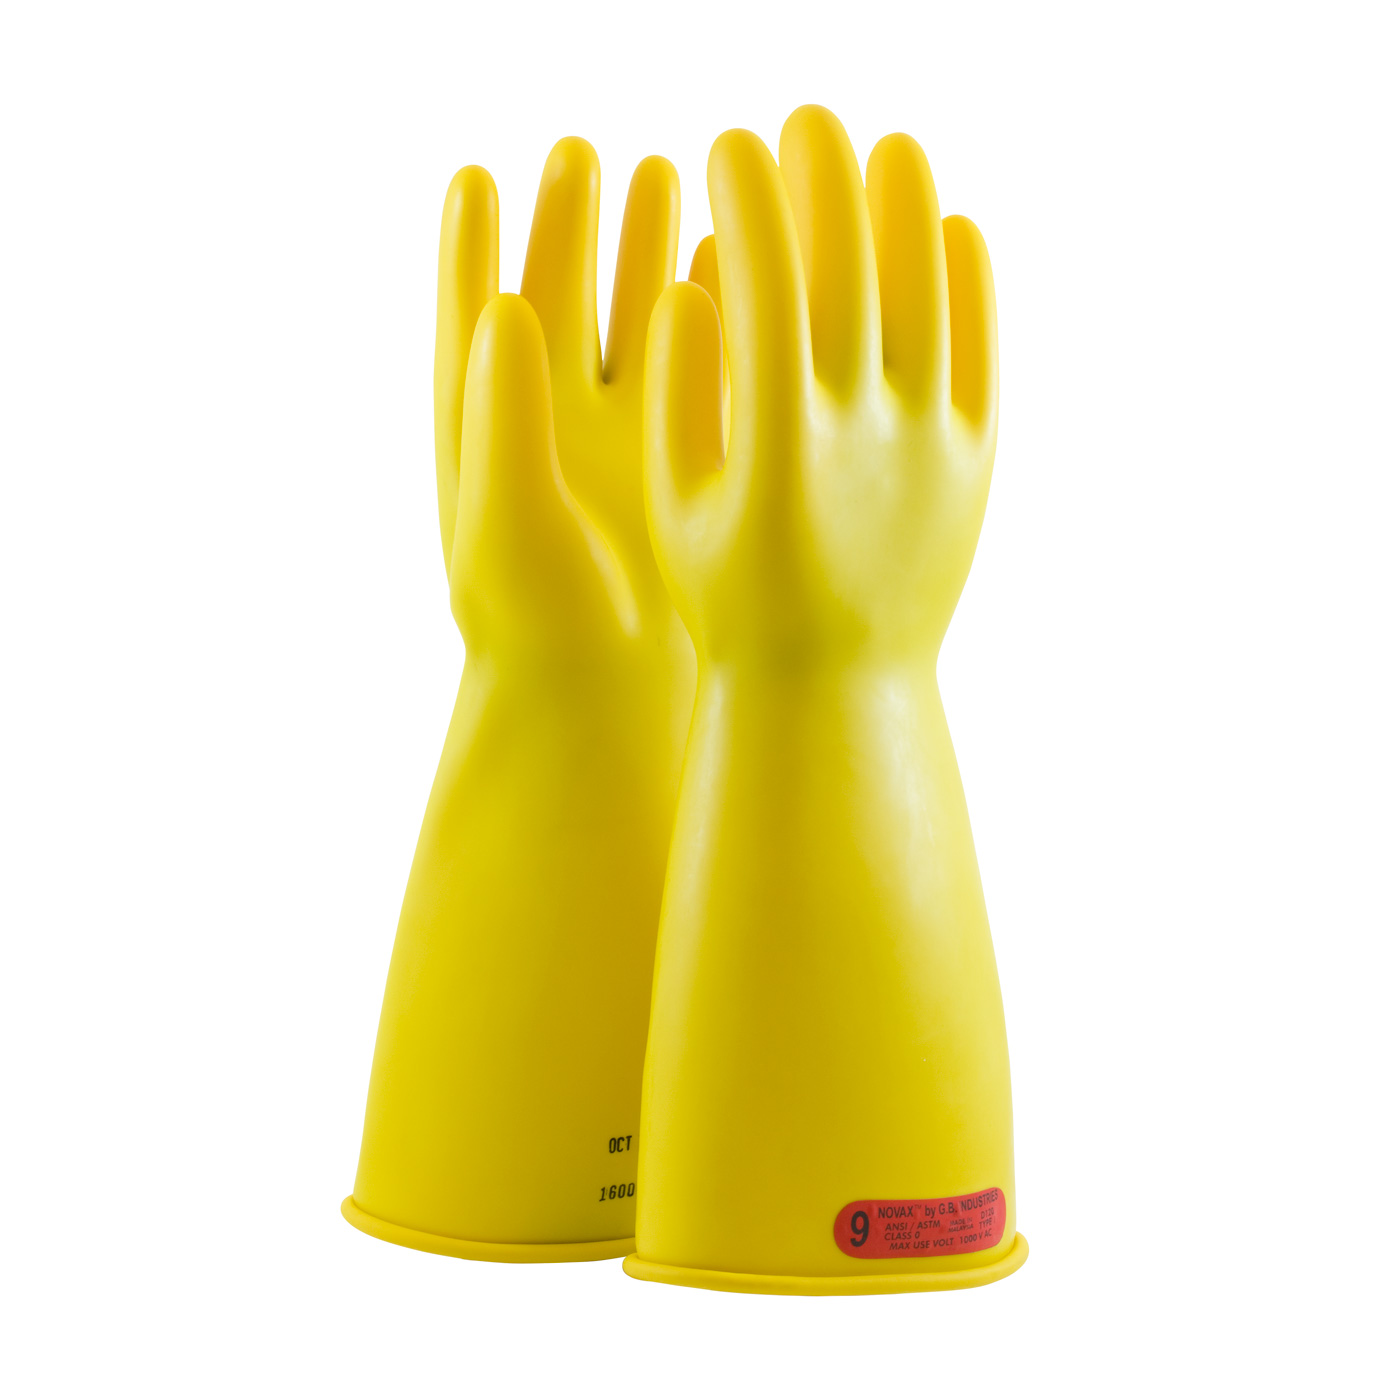 M Yellow Pack of 144 manufacturer 1181D83CS Tronex 1908-20 Multi-Purpose Flock-Lined Glove Fully Textured Powder-Free 